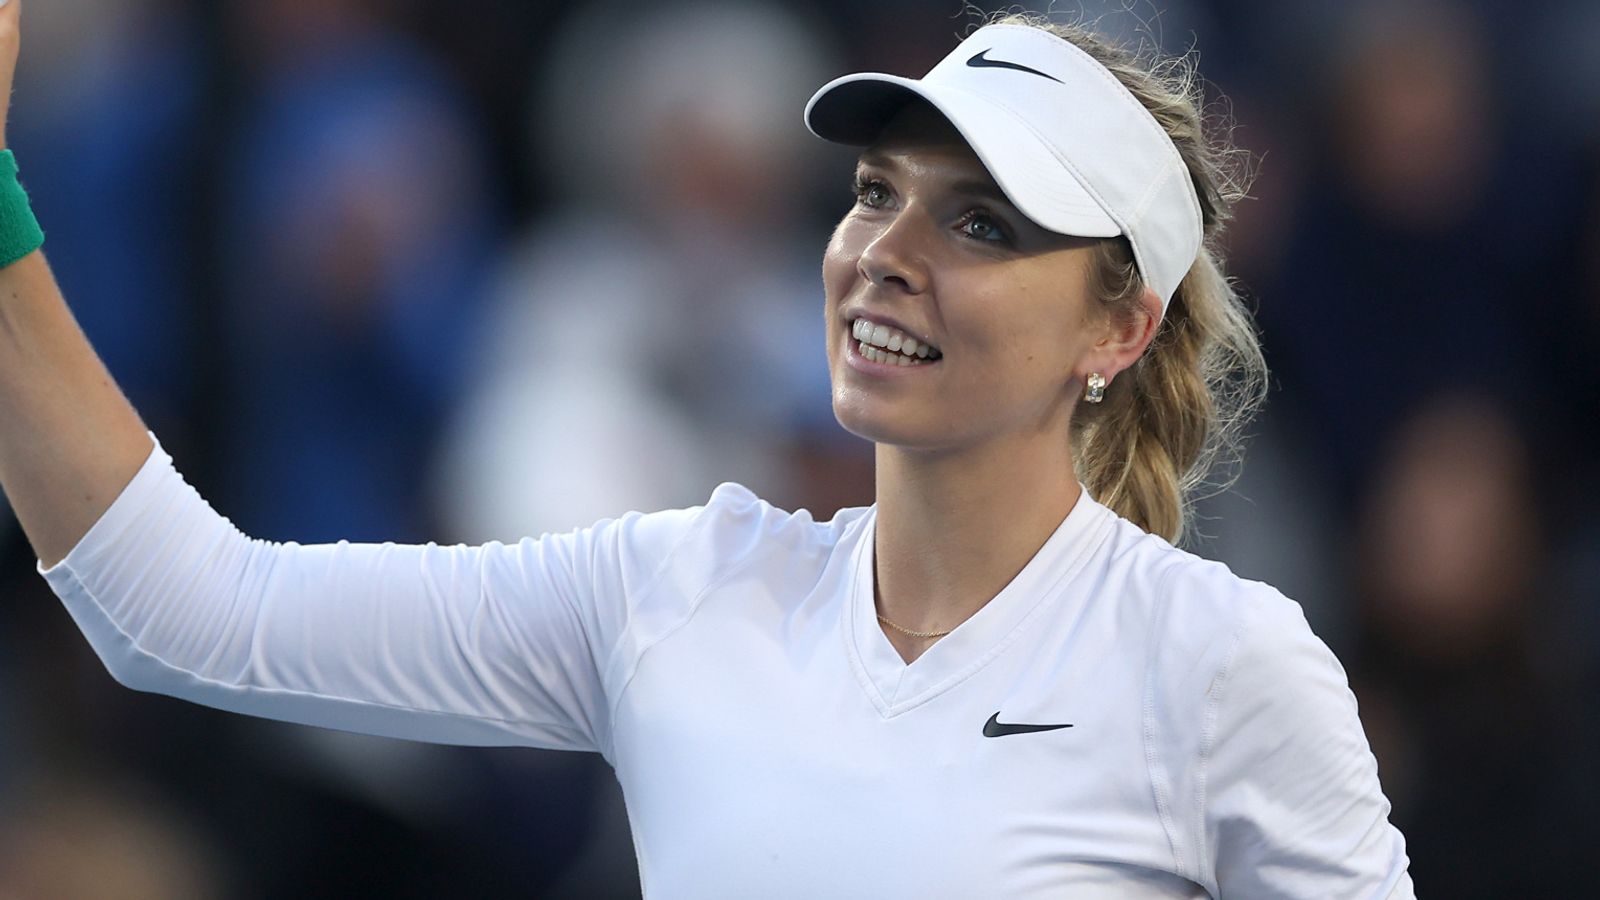 Great Britain's Katie Boulter eases into first WTA 500 final in San